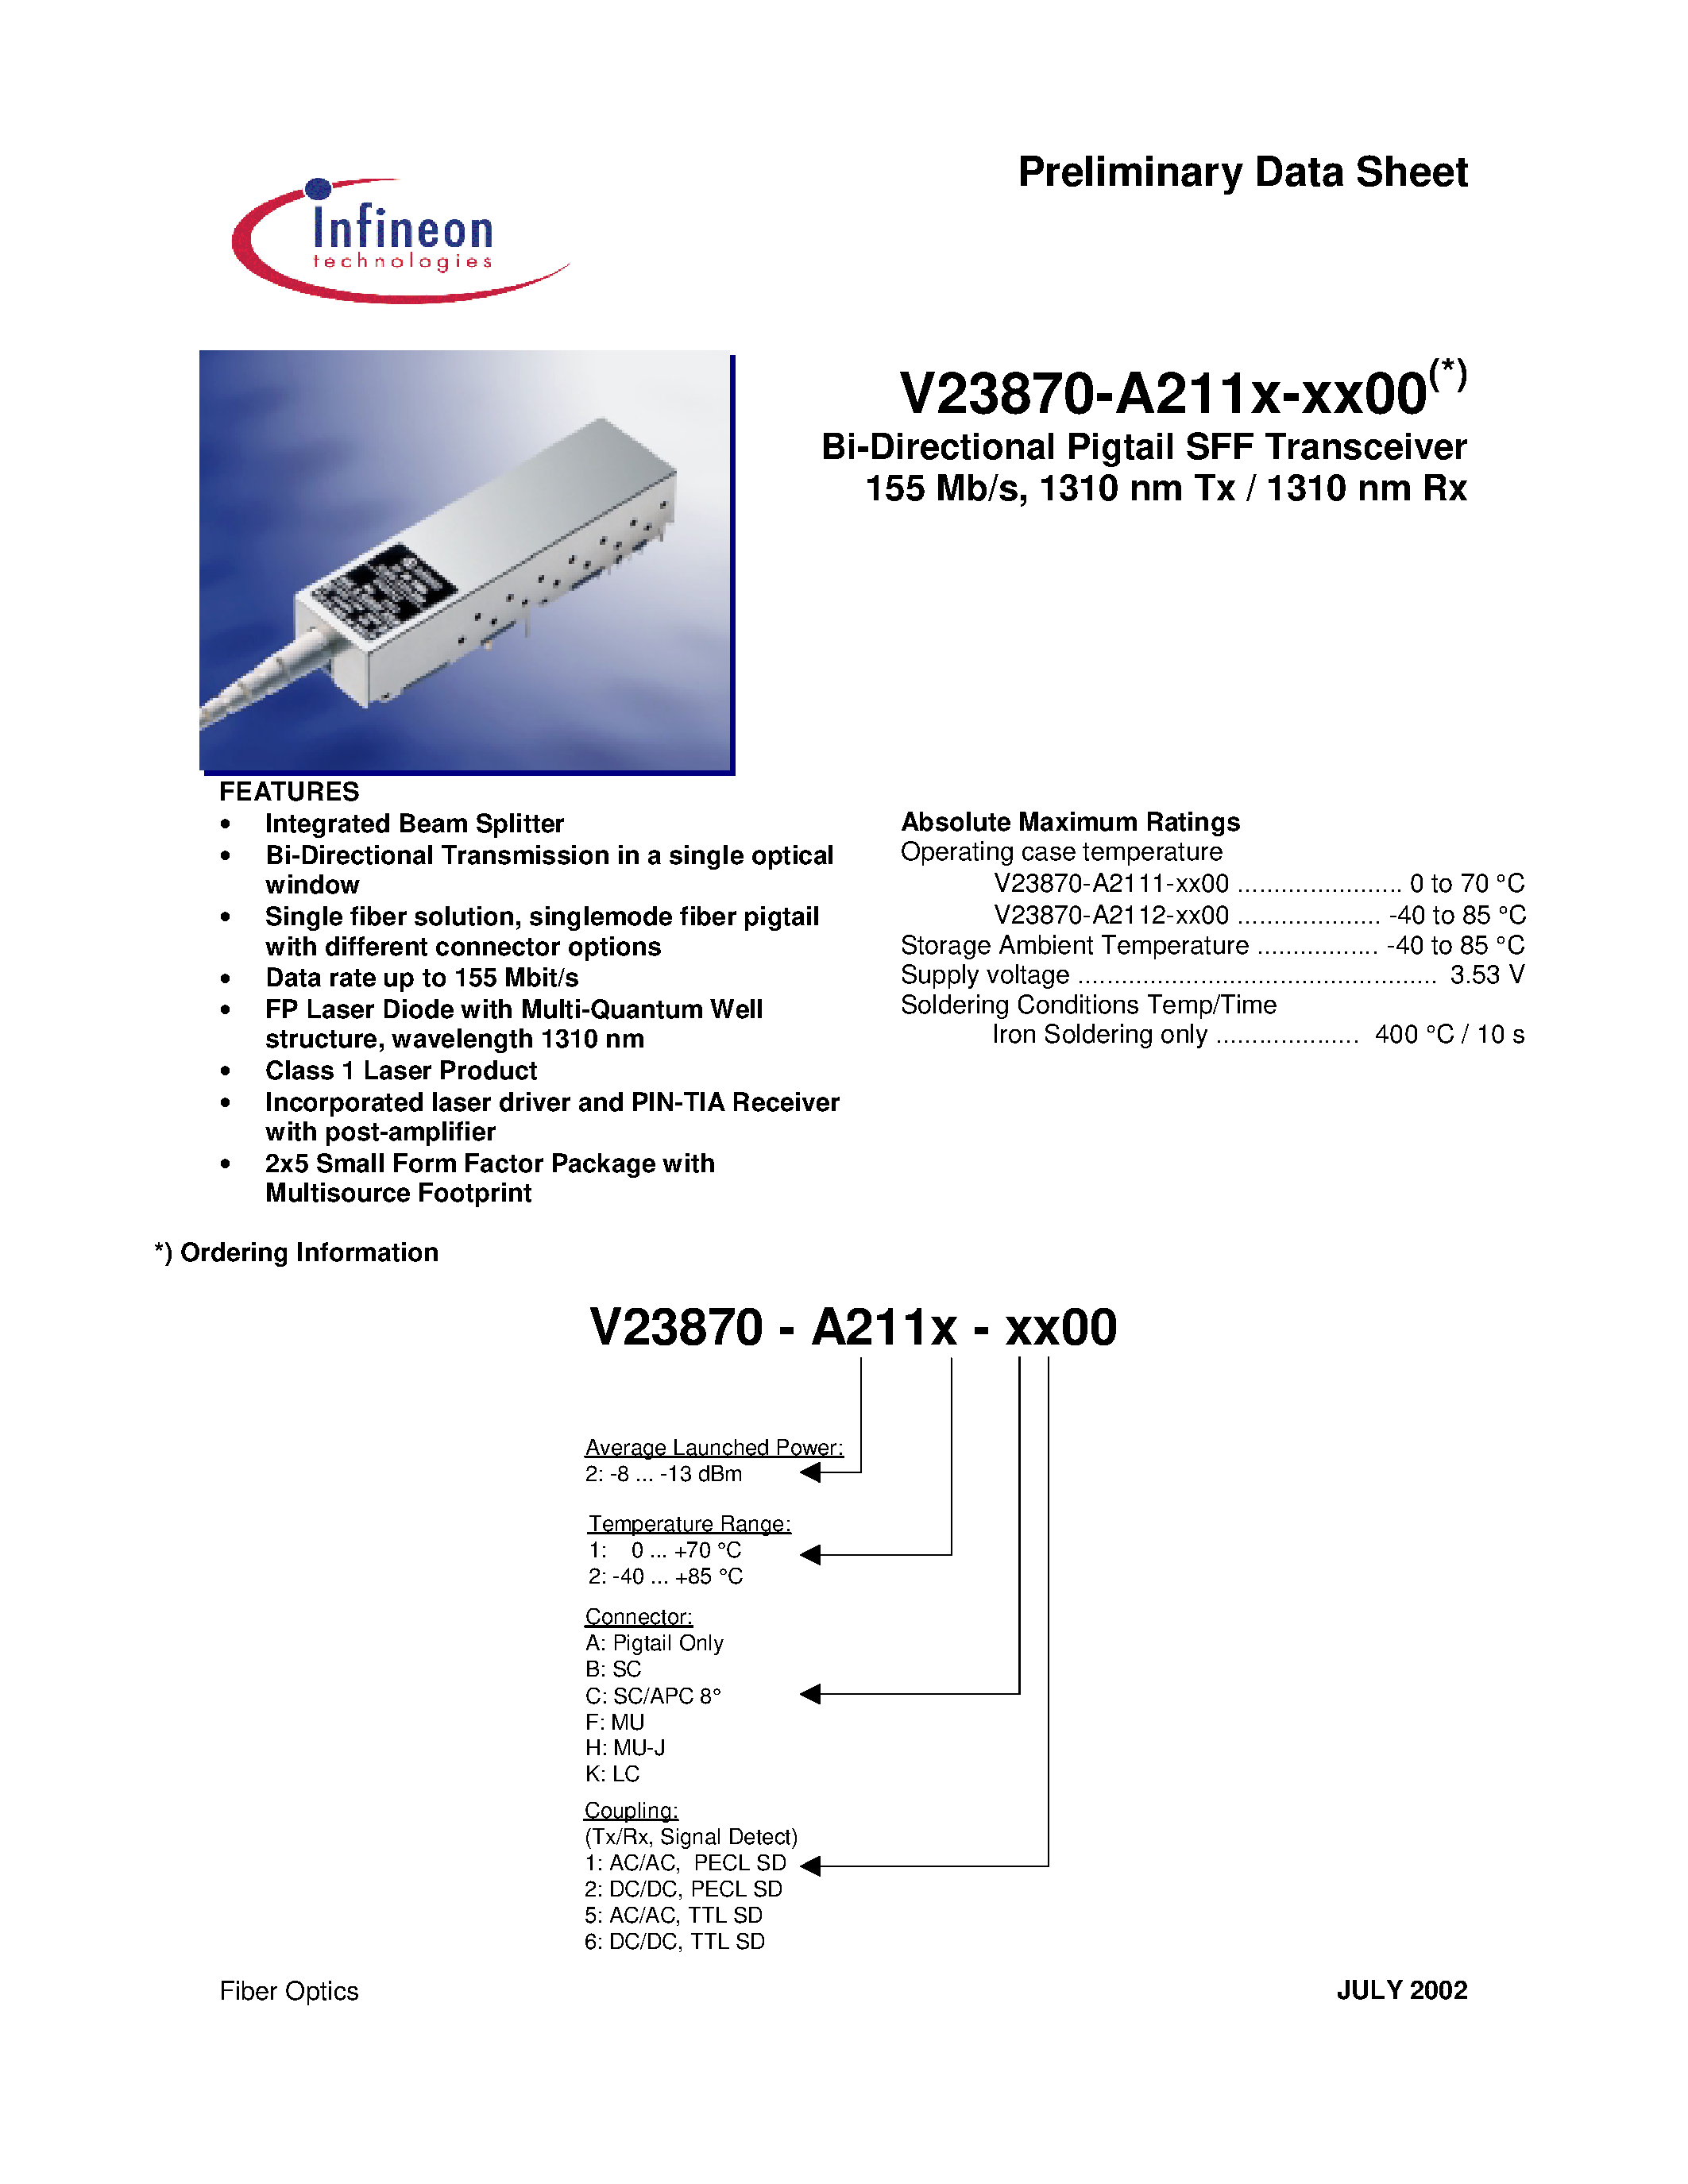 Datasheet V23870-A2112-F200 - Bi-Directional Pigtail SFF Transceiver 155 Mb/s/ 1310 nm Tx / 1310 nm Rx page 1